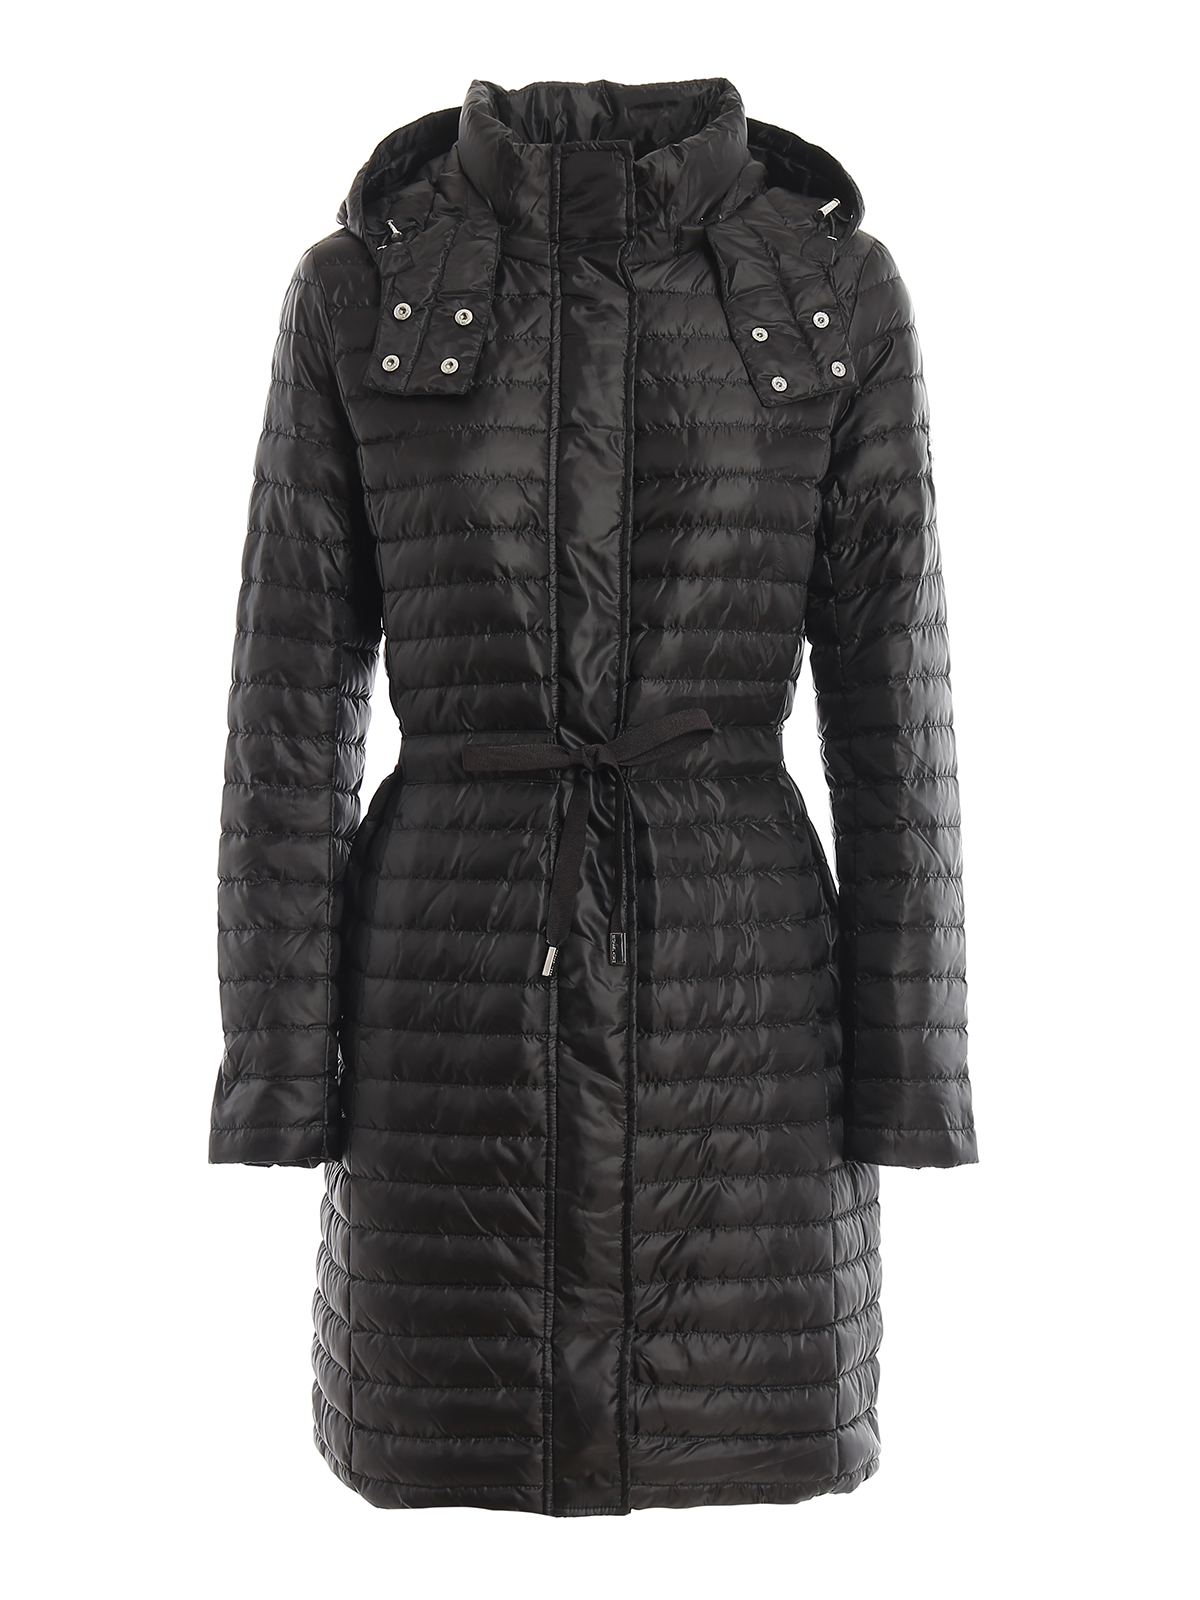 MICHAEL KORS BLACK QUILTED HOODED PADDED COAT